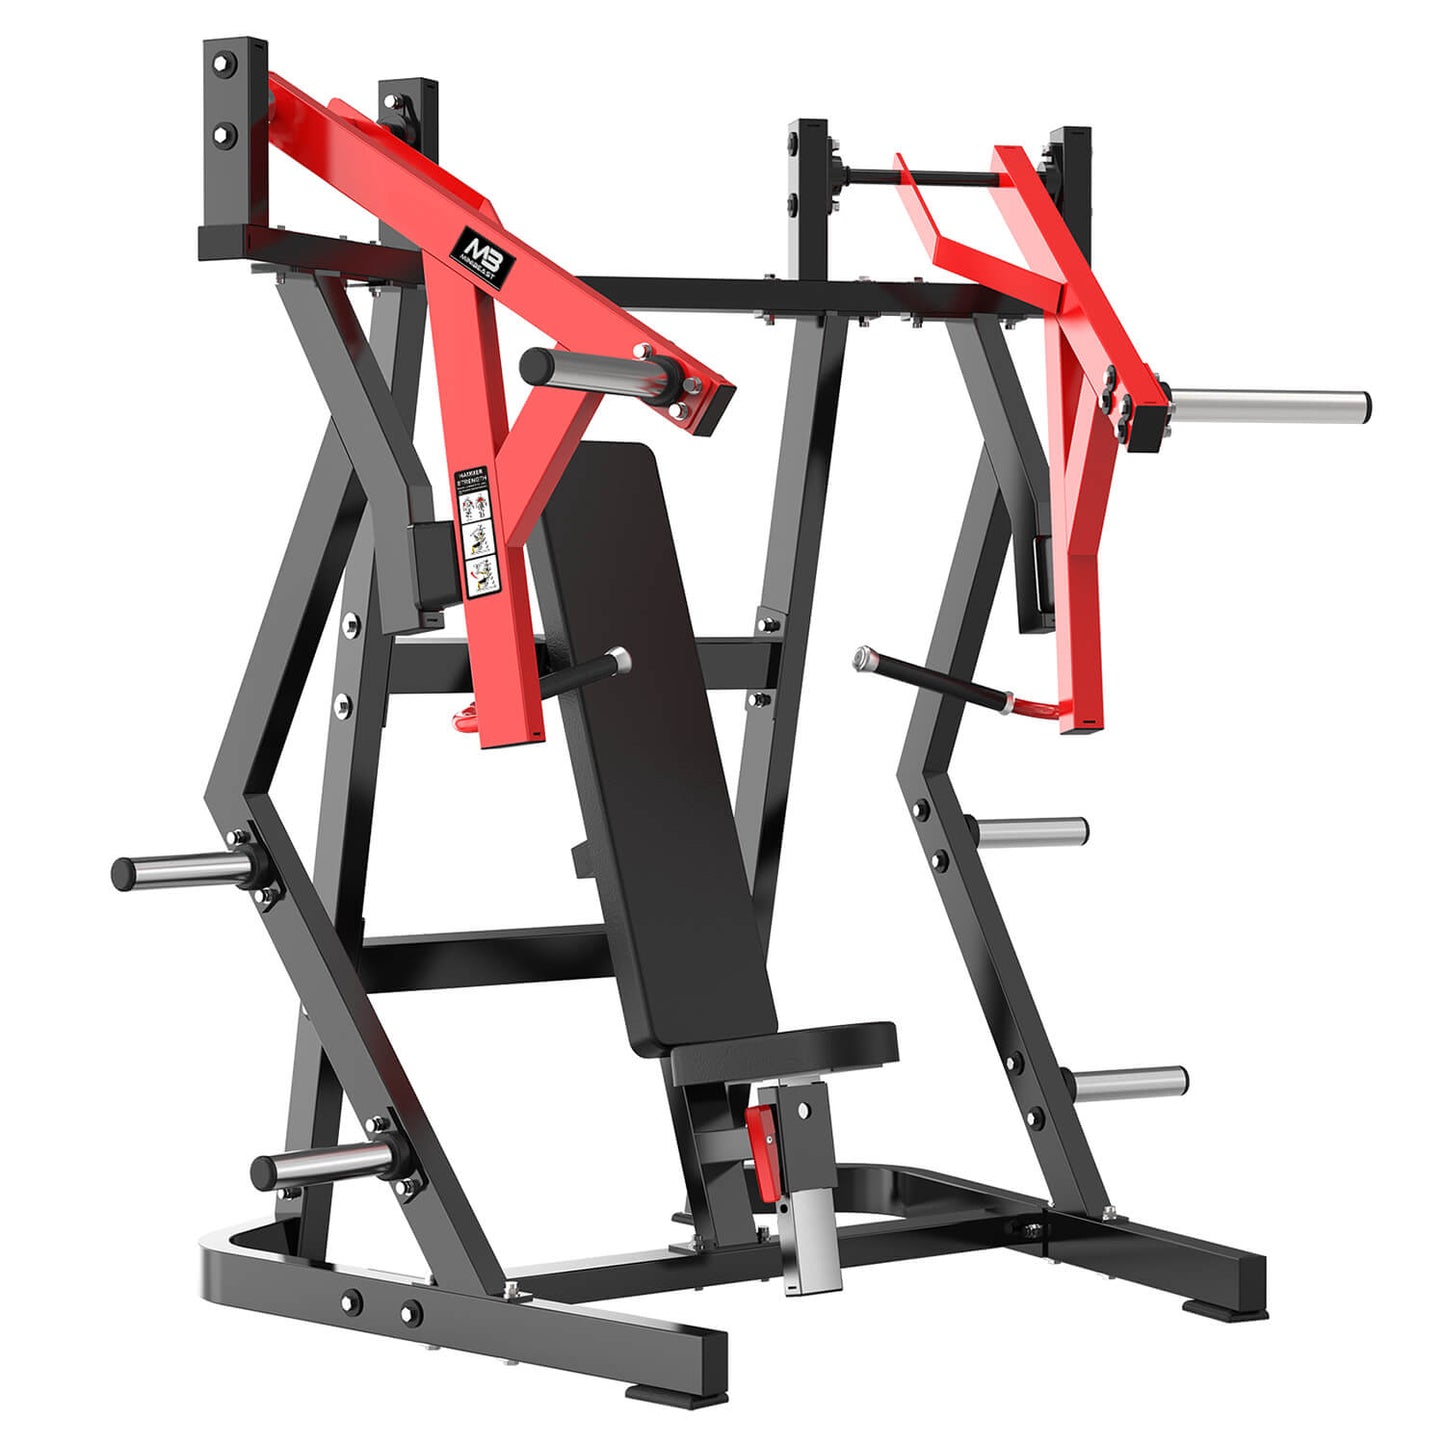 MBTM - Seated chest press